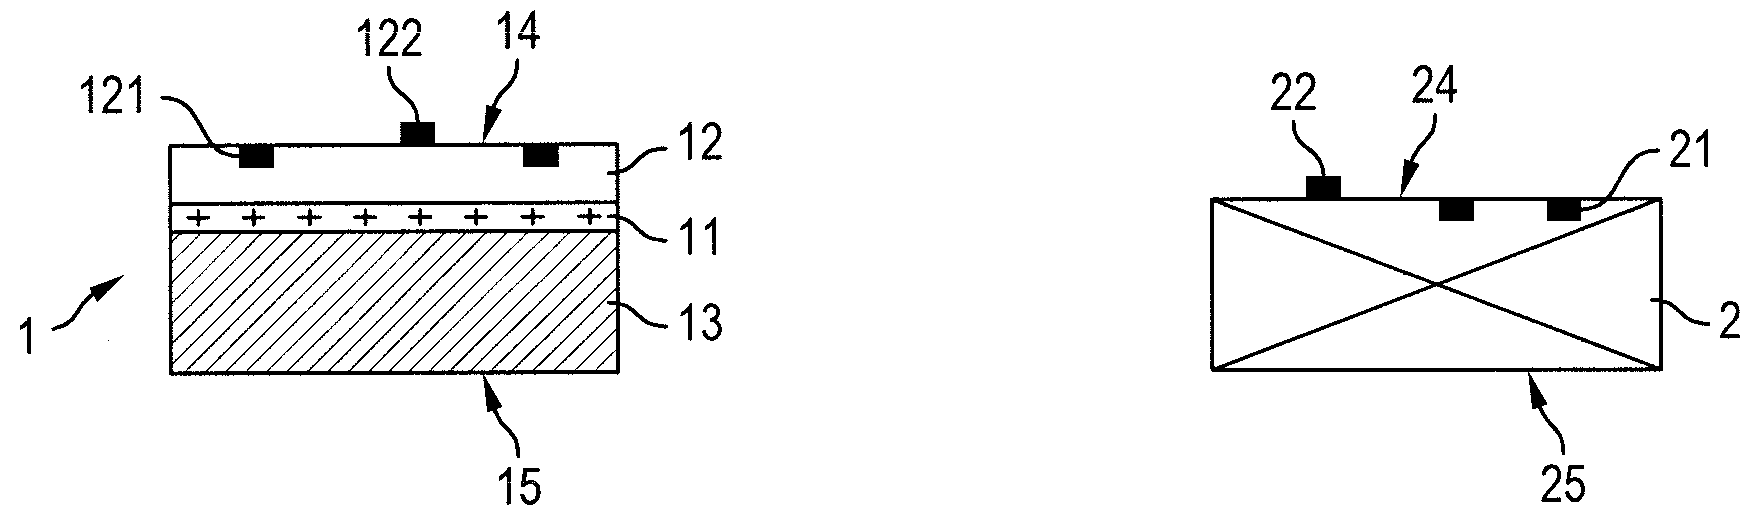 Process for bonding and transferring a layer